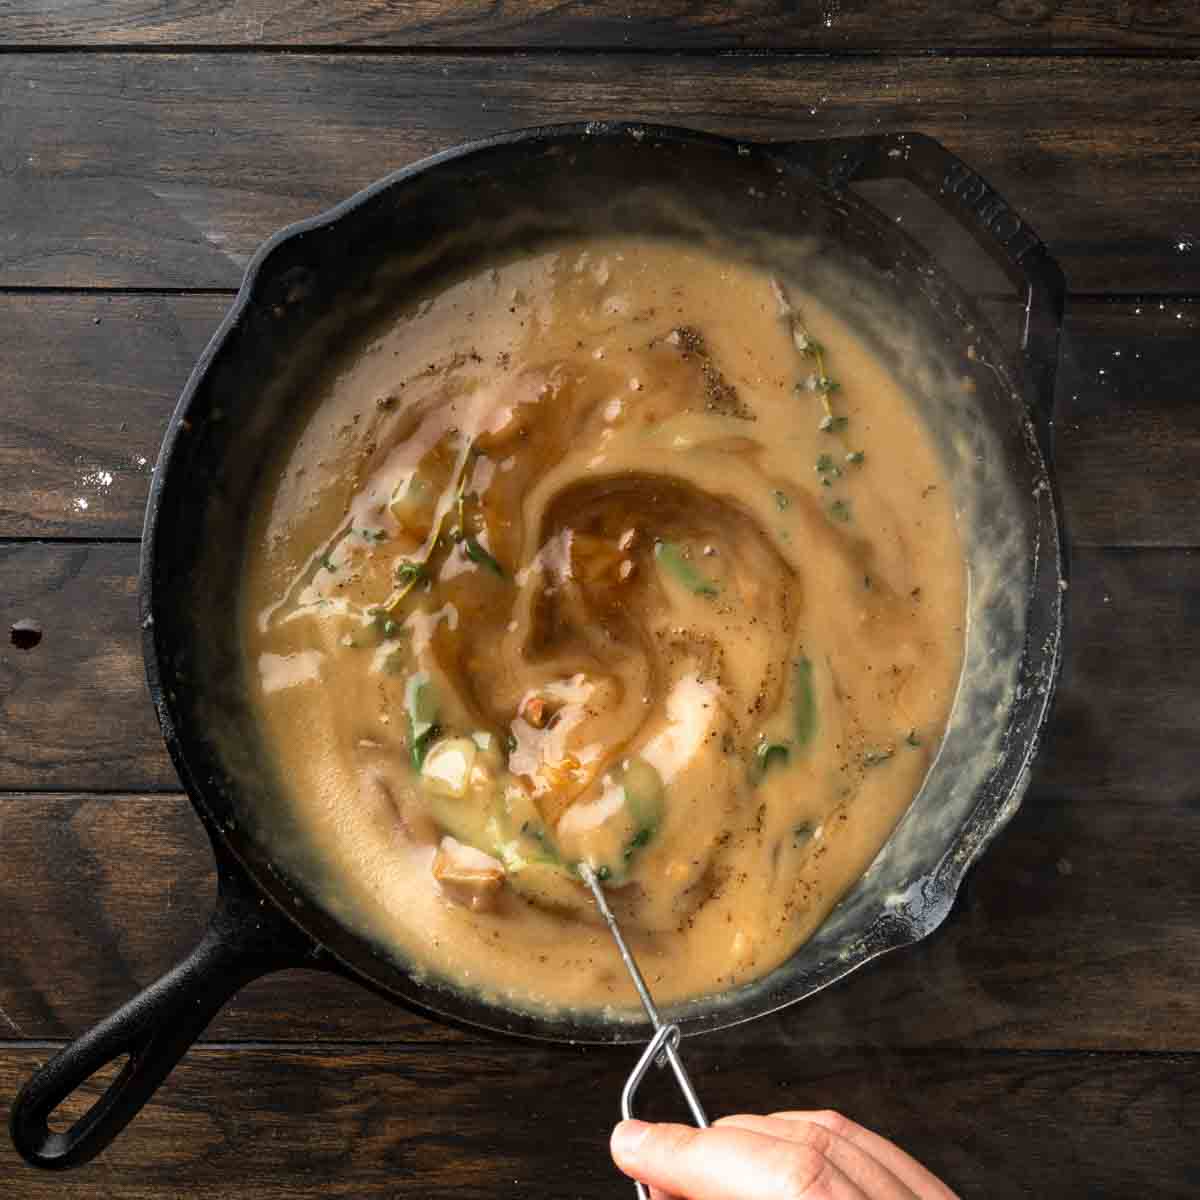 Simmering turkey gravy in a skillet with shallots, garlic and herbs.